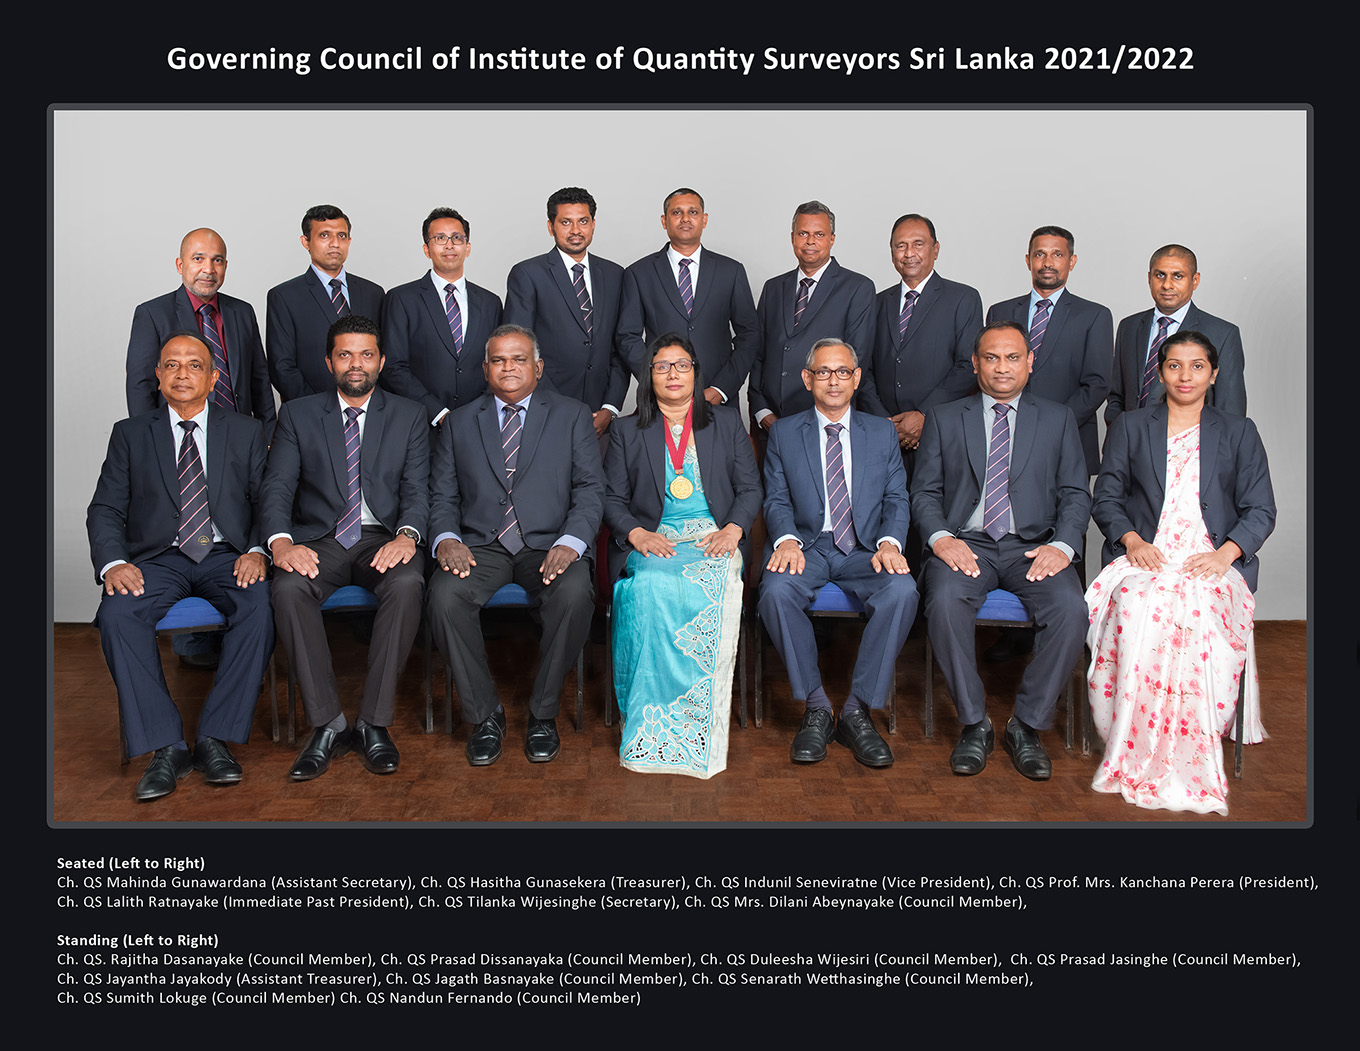 iqssl-council-members-group-photo-2022-names